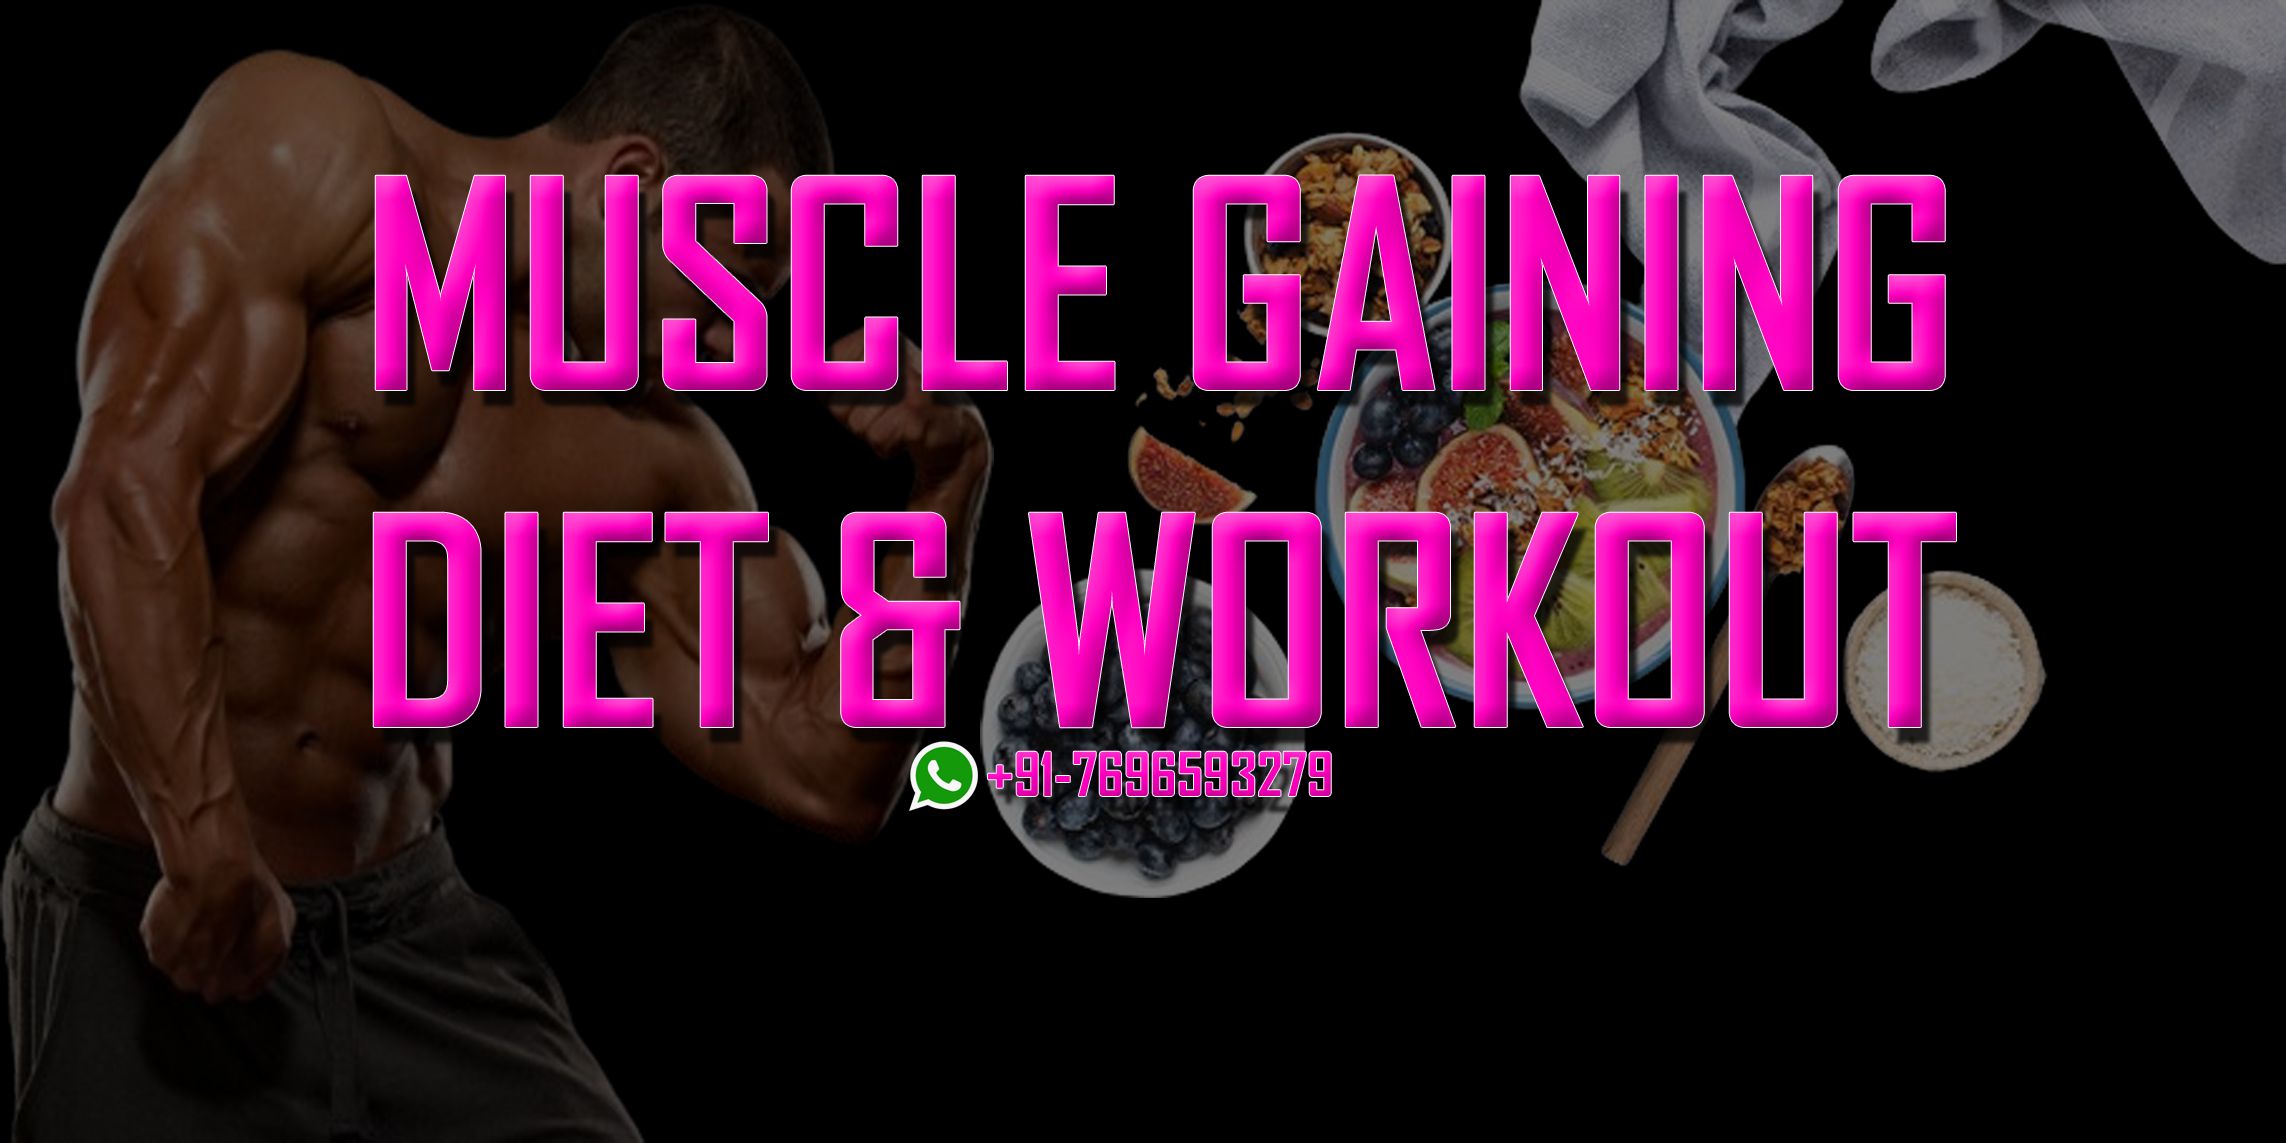 Workout & Diet Plan for Muscle Gain